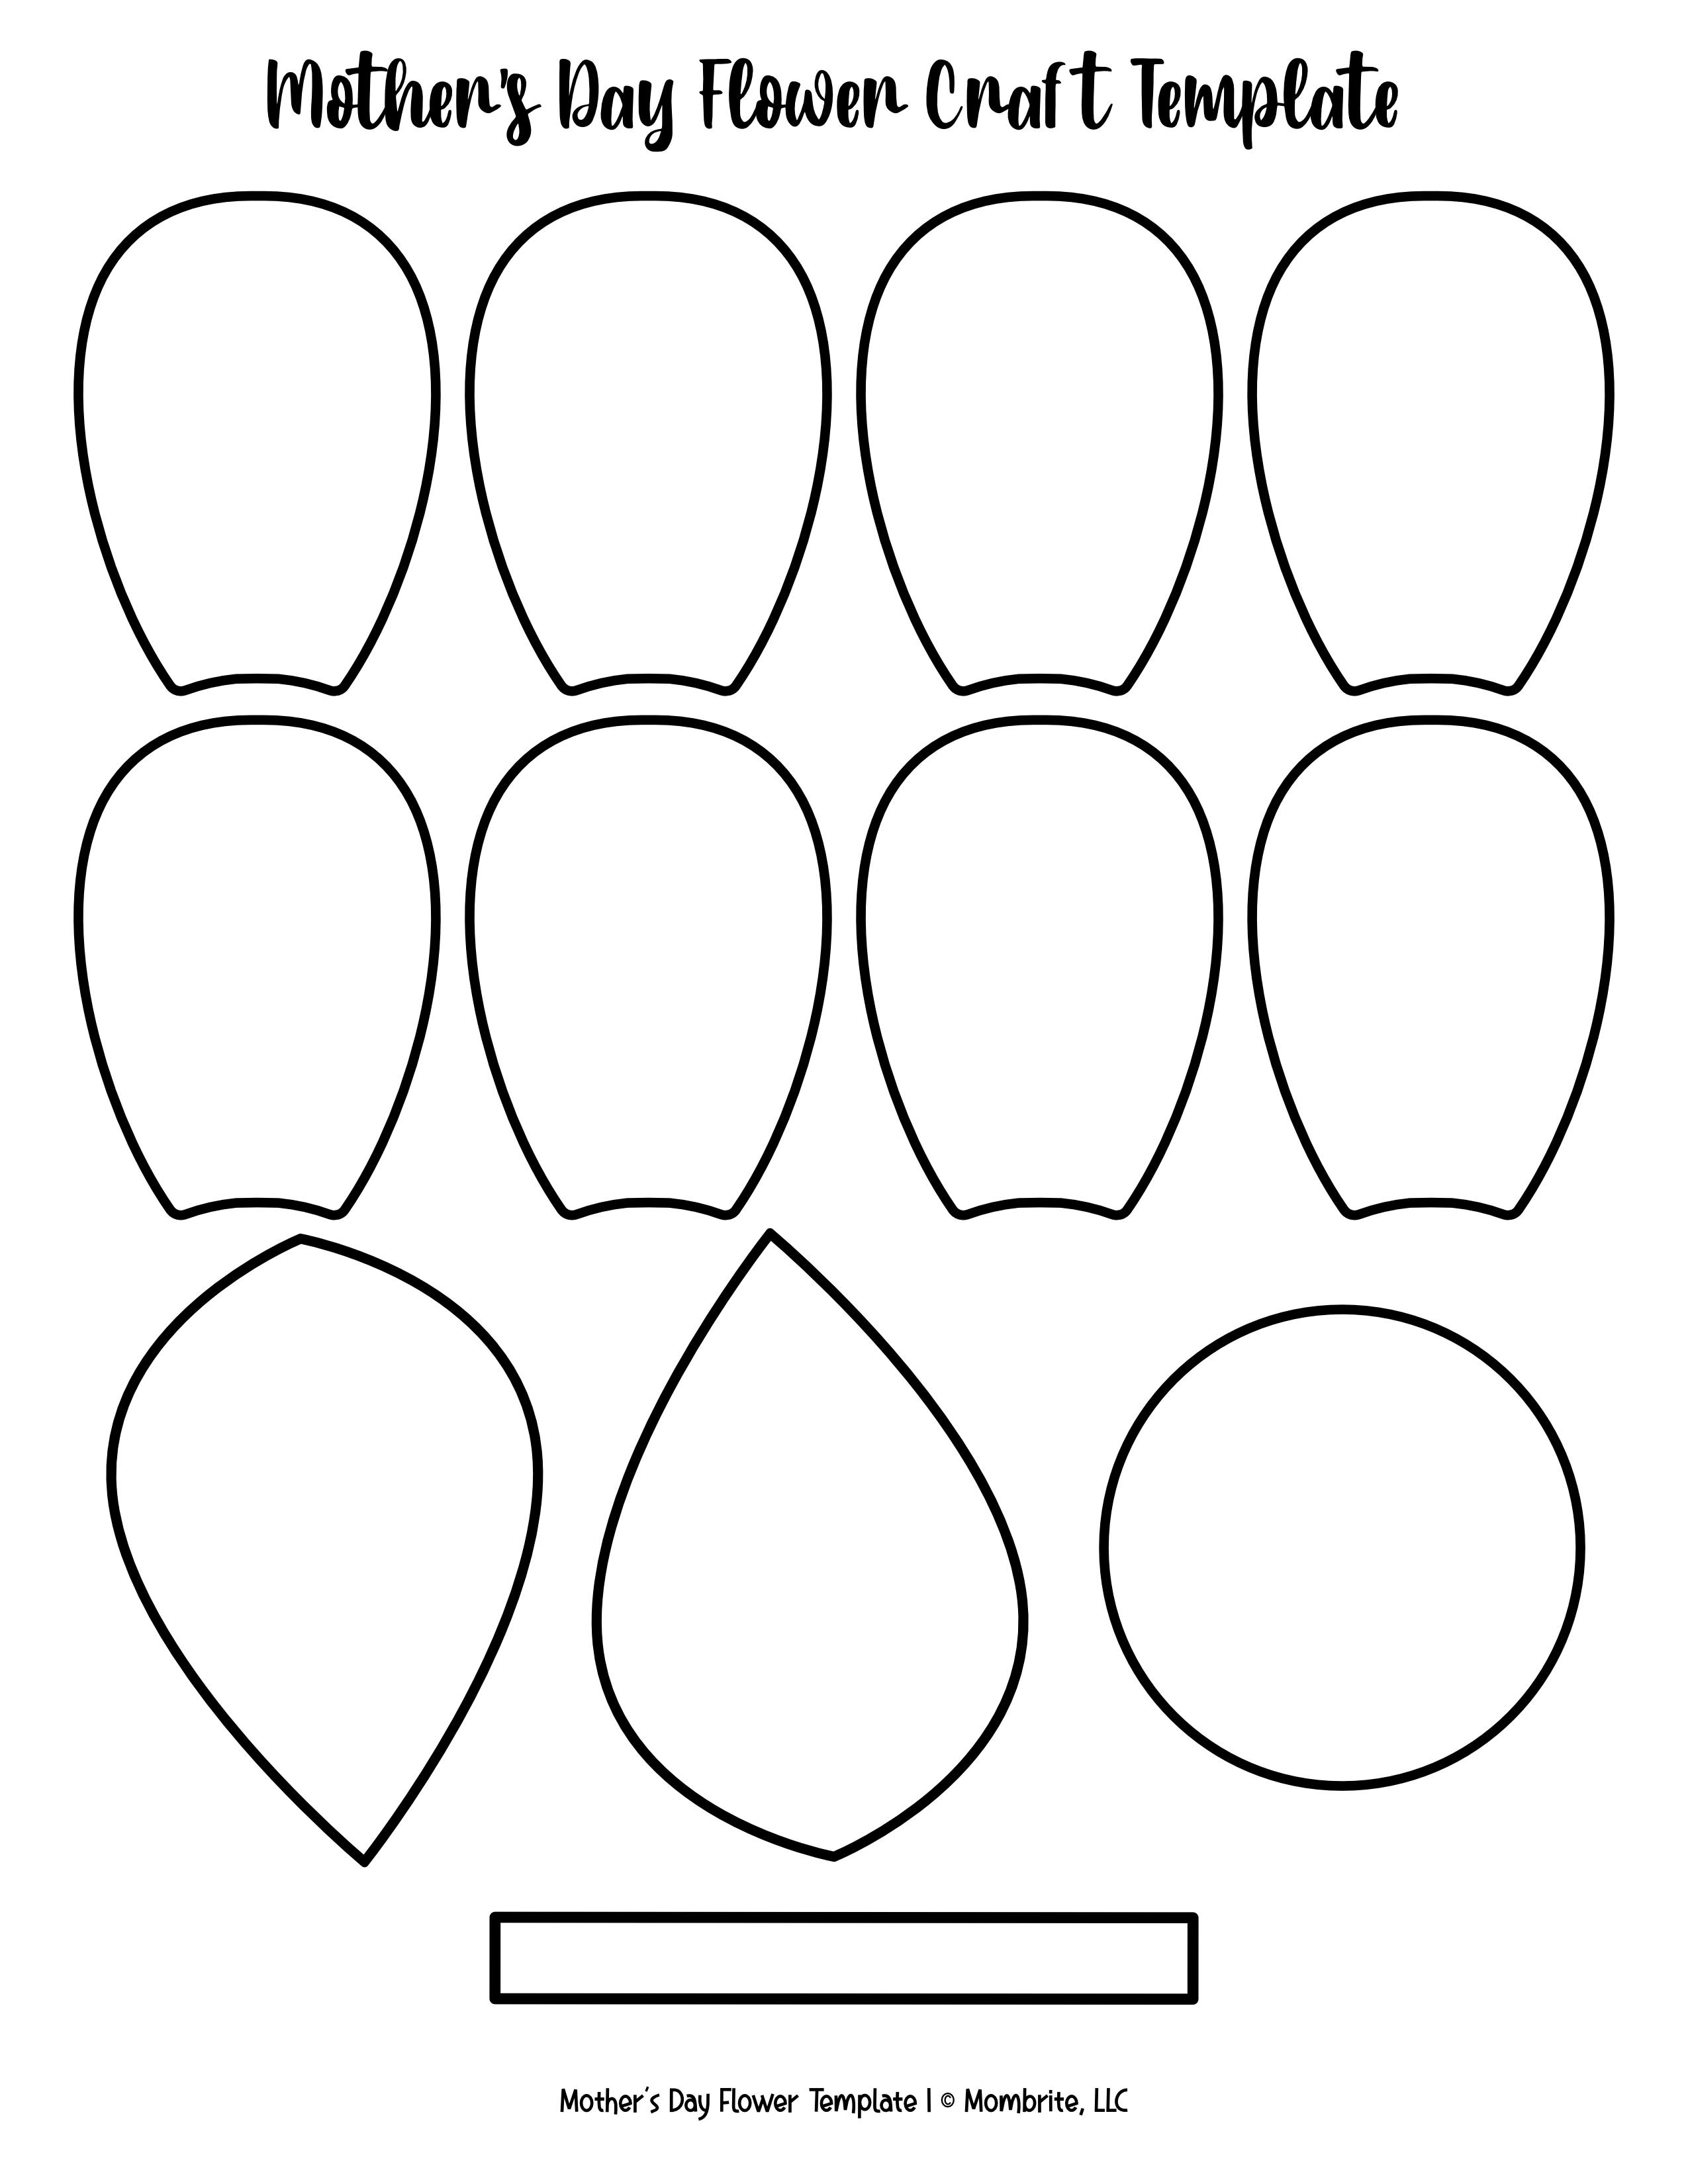 Free Mother's Day Flower Craft Template